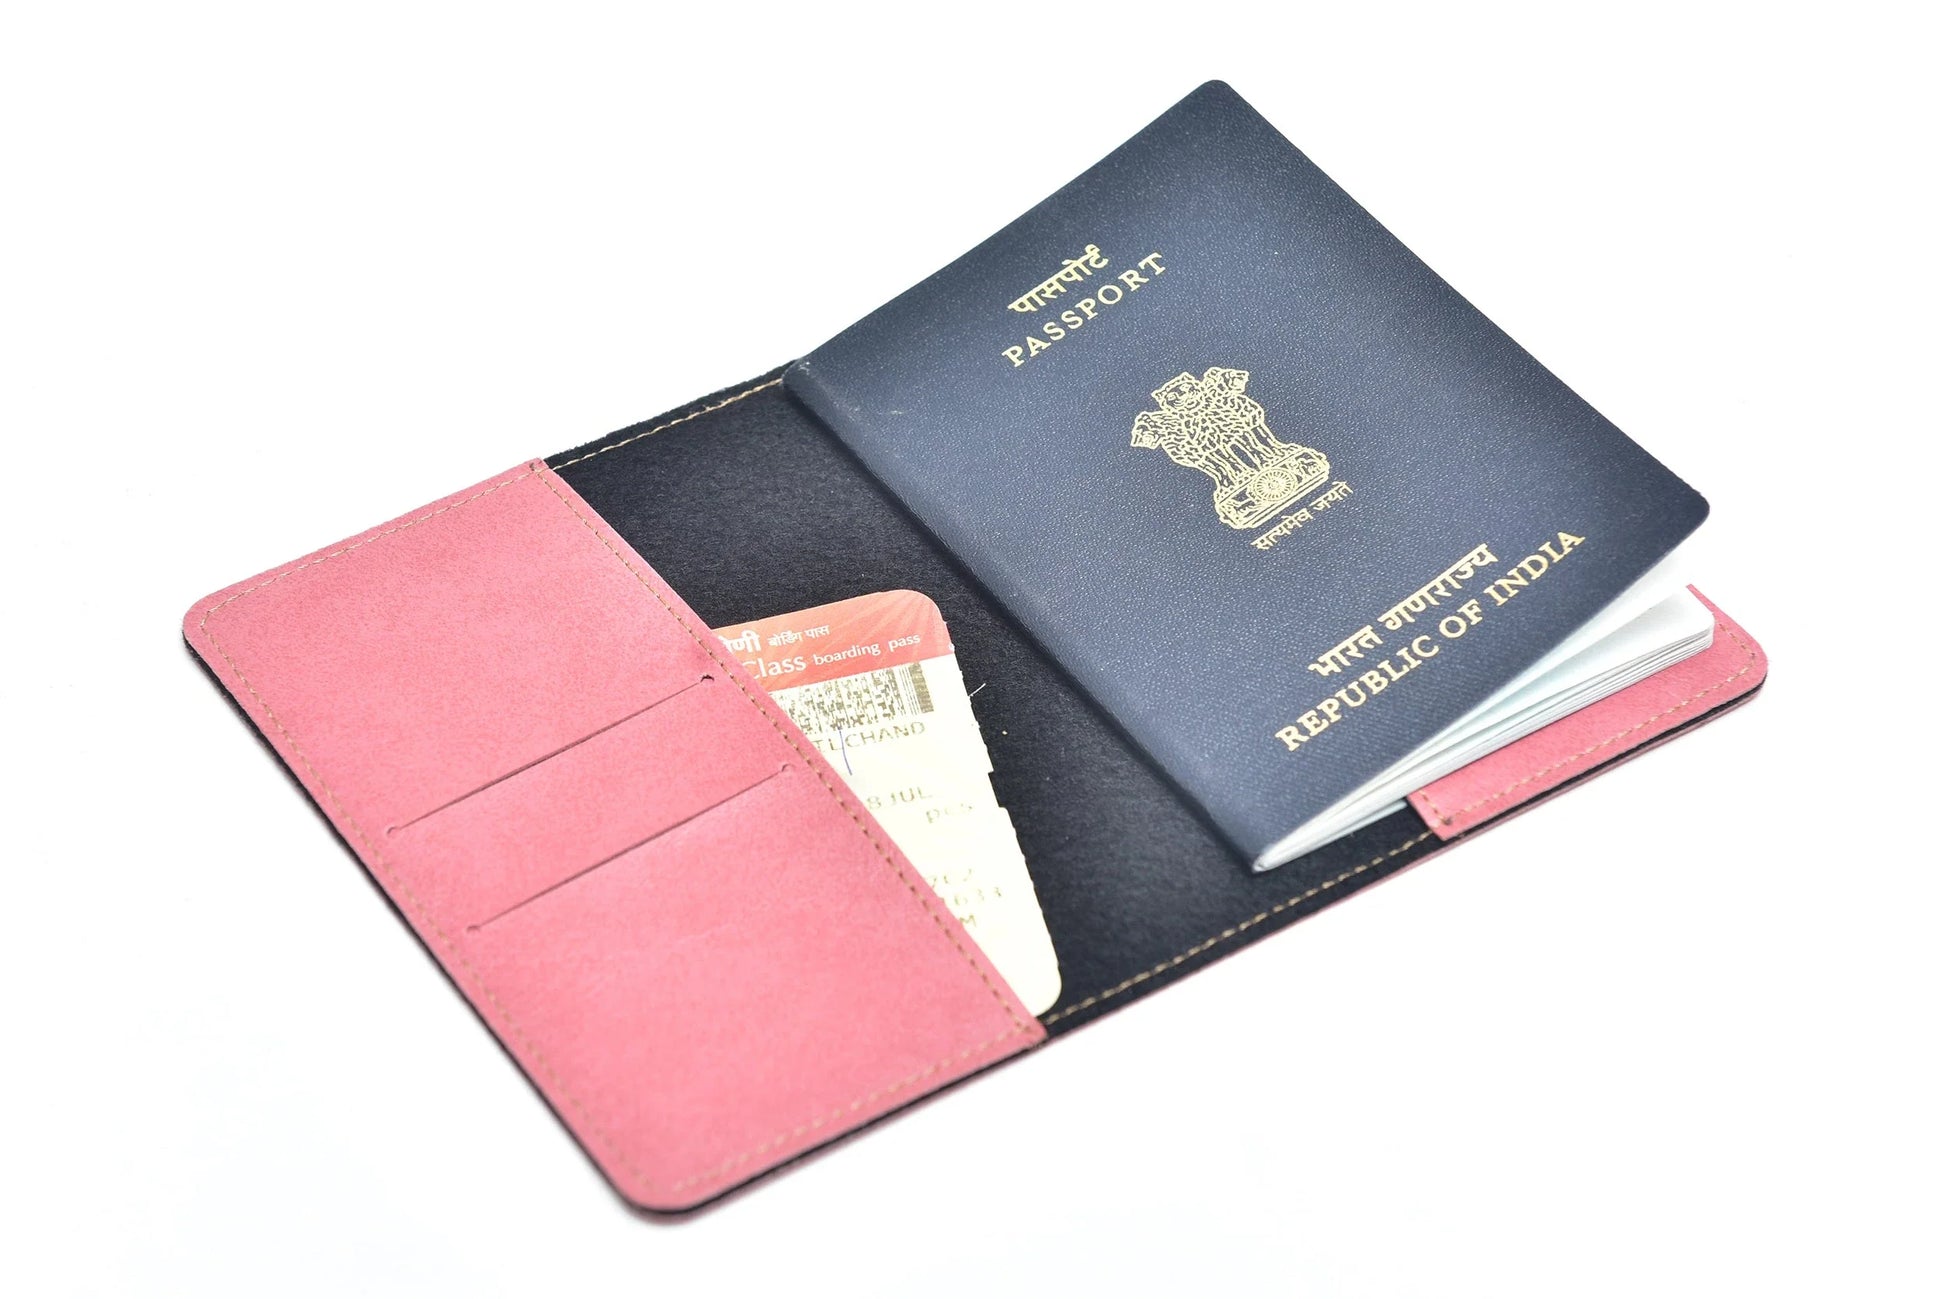 Inside or open view of peach passport cover